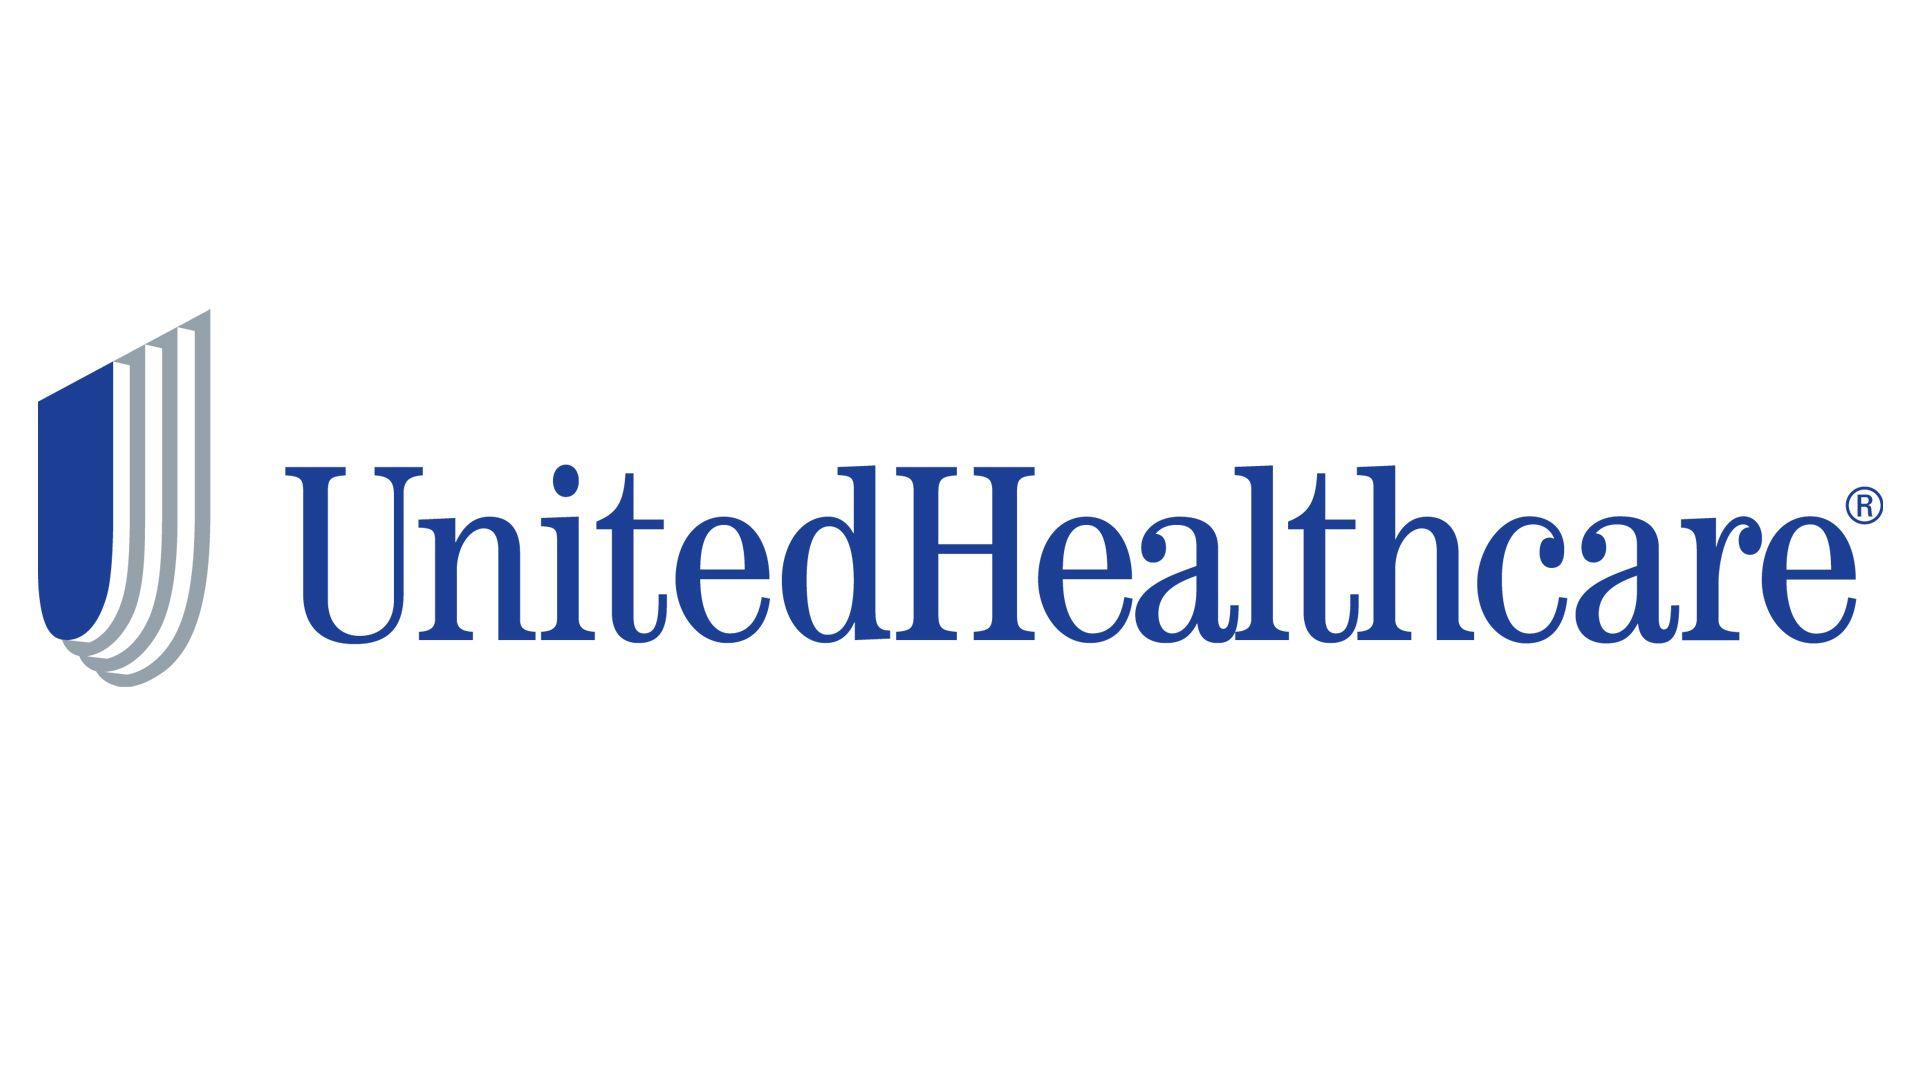 UHC Logo - Meaning United Healthcare logo and symbol | history and evolution